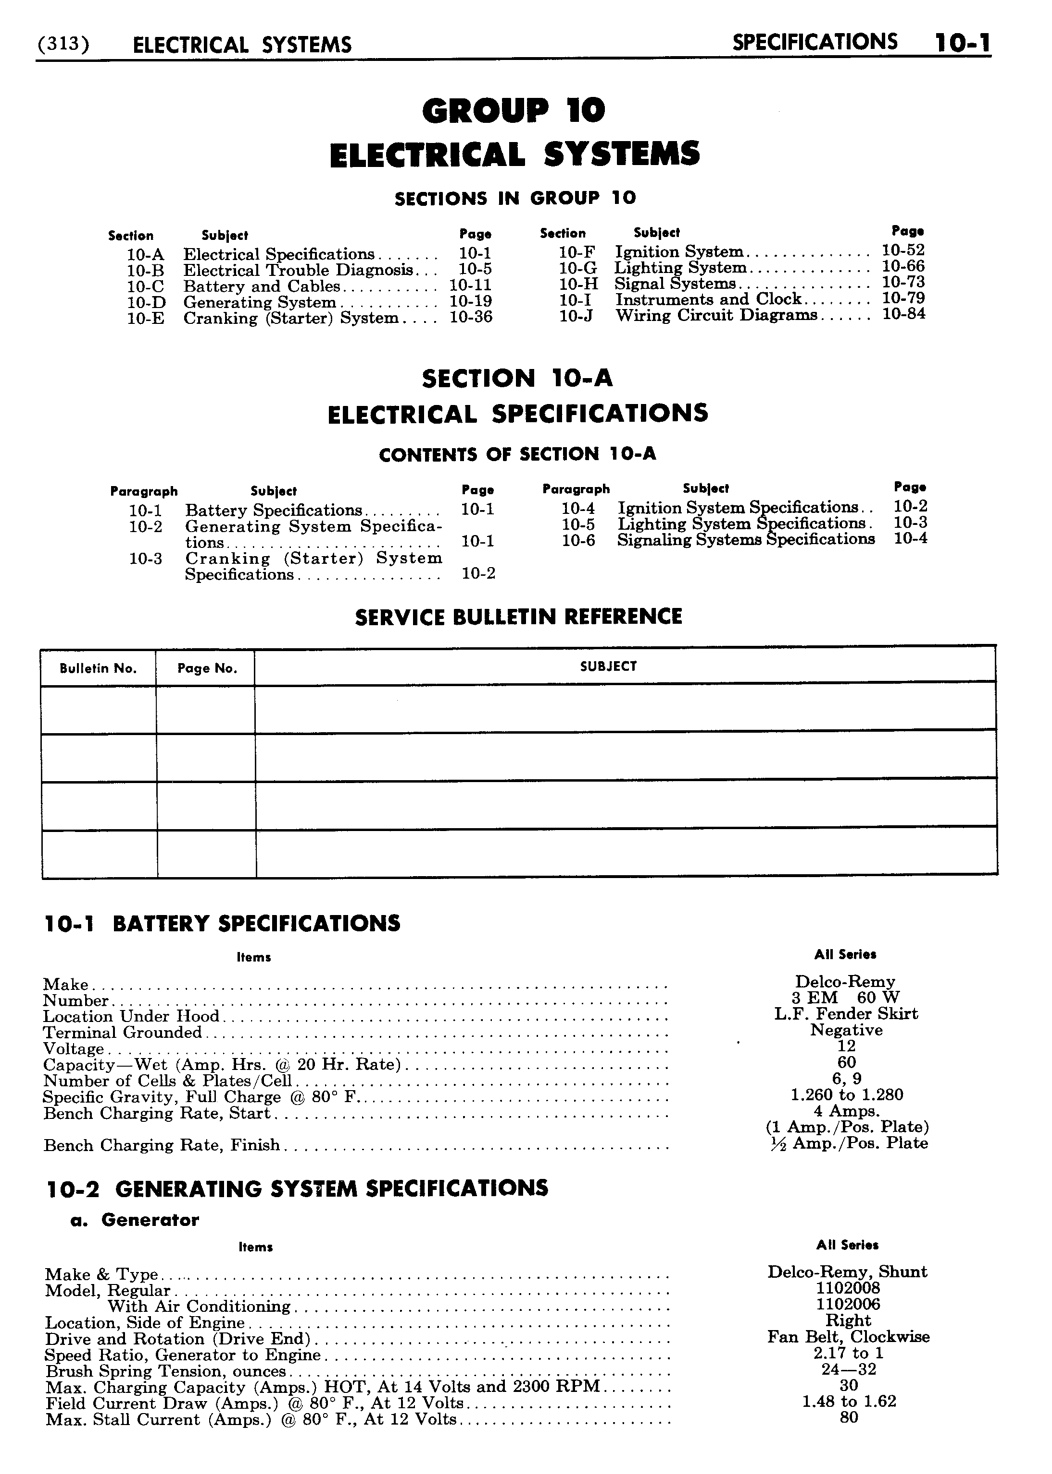 n_11 1954 Buick Shop Manual - Electrical Systems-001-001.jpg